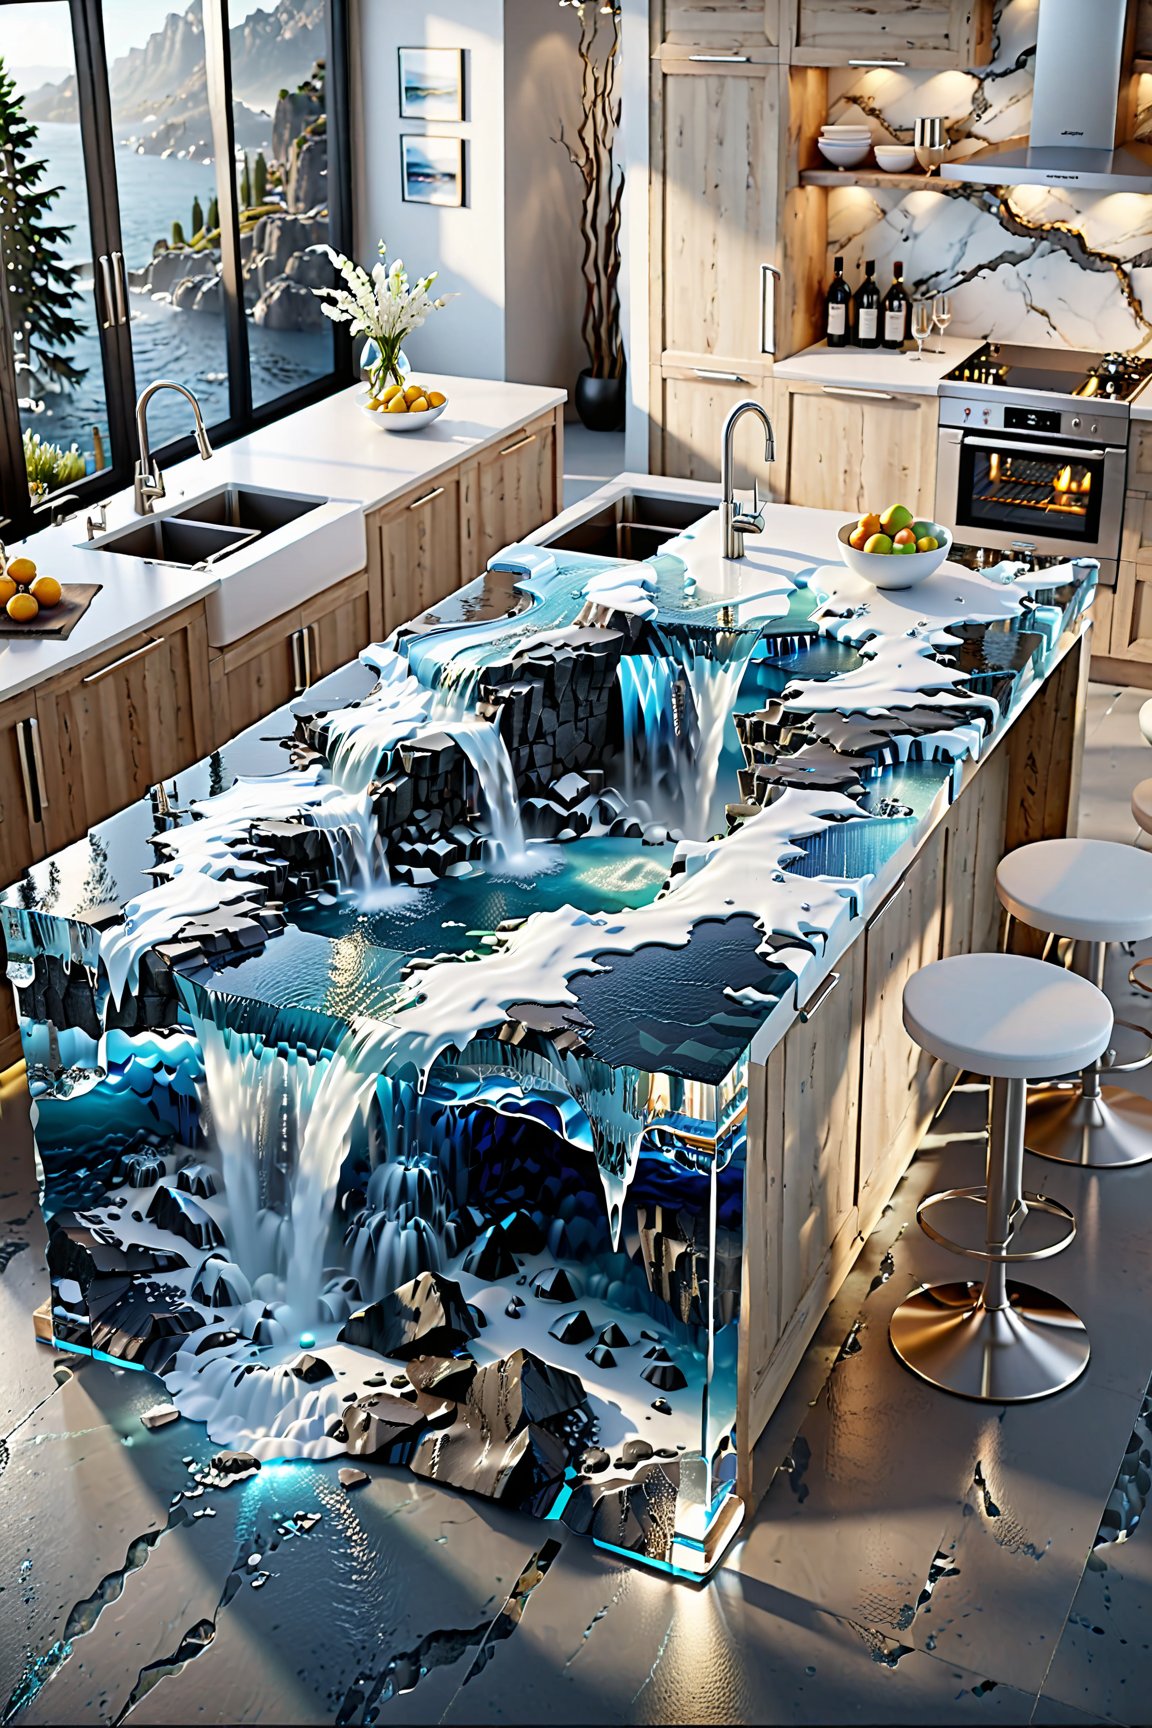 (masterpiece, best quality:1.4), a kitchen island with a waterfall in the middle of it, an exquisite 3 d map, trending on artstatioin, flowing realistic fabric, fantasy 4k, salt effects, big desk, autodesk, epicurious, trending on artsation, lava rock, by Arnold Brügger, high grain, surrealism designed,
ensure that the shadows and lighting looks realistic and believable,
ensure that the kitchen island looks extremely realistic and believable,
ensure that the water and ice, looks extremely realistic and believable,
16k, high-difinition, 32-Bit-high color, high-resolution, high-fidelity, high-quality, ultra HD, super-resolution, enhanced detail, crystal clear, high-definition color, high-definition texture, sharpness boost, ultra-high quality,
make the effects extrem photorealistic, make the light and shadow more realistic, (make the atmosphere more realistic:1.3), (make the background more interesting:1.2), make the backround more realistic, make water extrem ultra realistic, make all accessories extremely ultra realistic,
water element, water, ice and water, ice, water, water ring,more detail XL